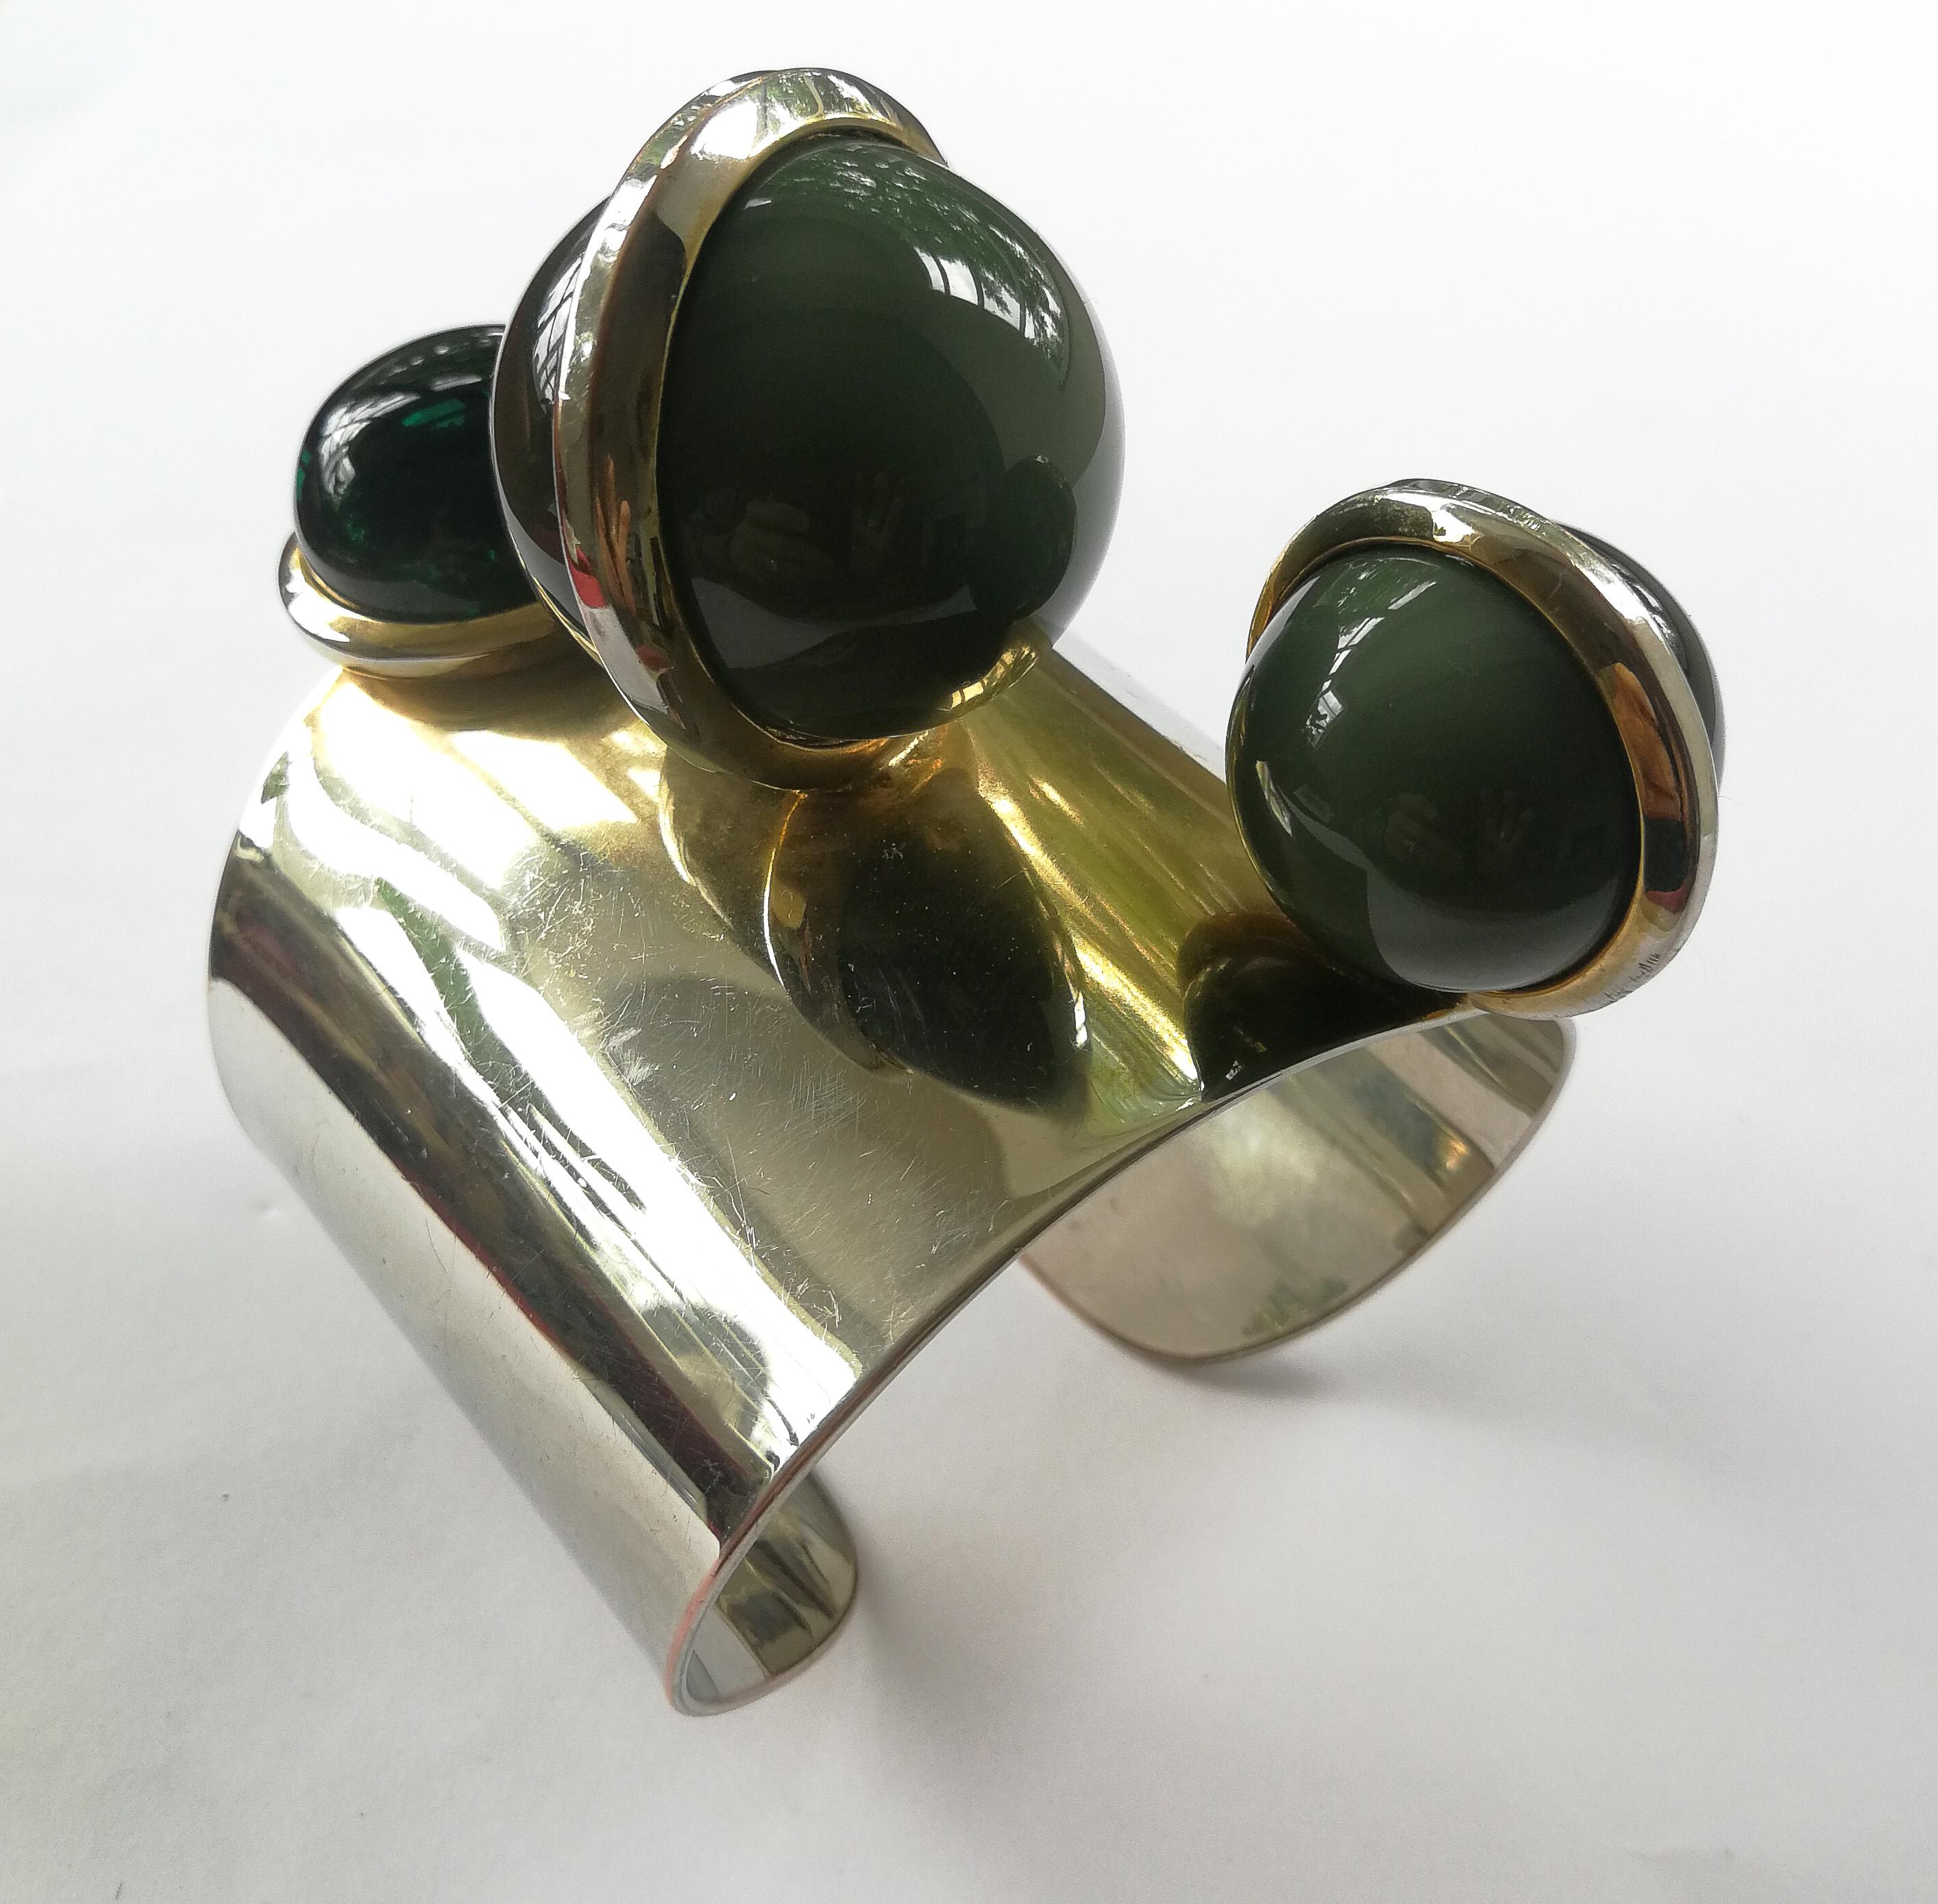 A very unusual, highly dynamic and most striking design makes this chrome metal bangle immediately eye catching, and a true conversation piece. The main body of this piece is a chromed bangle, showing some signs of a very soft gilding around the